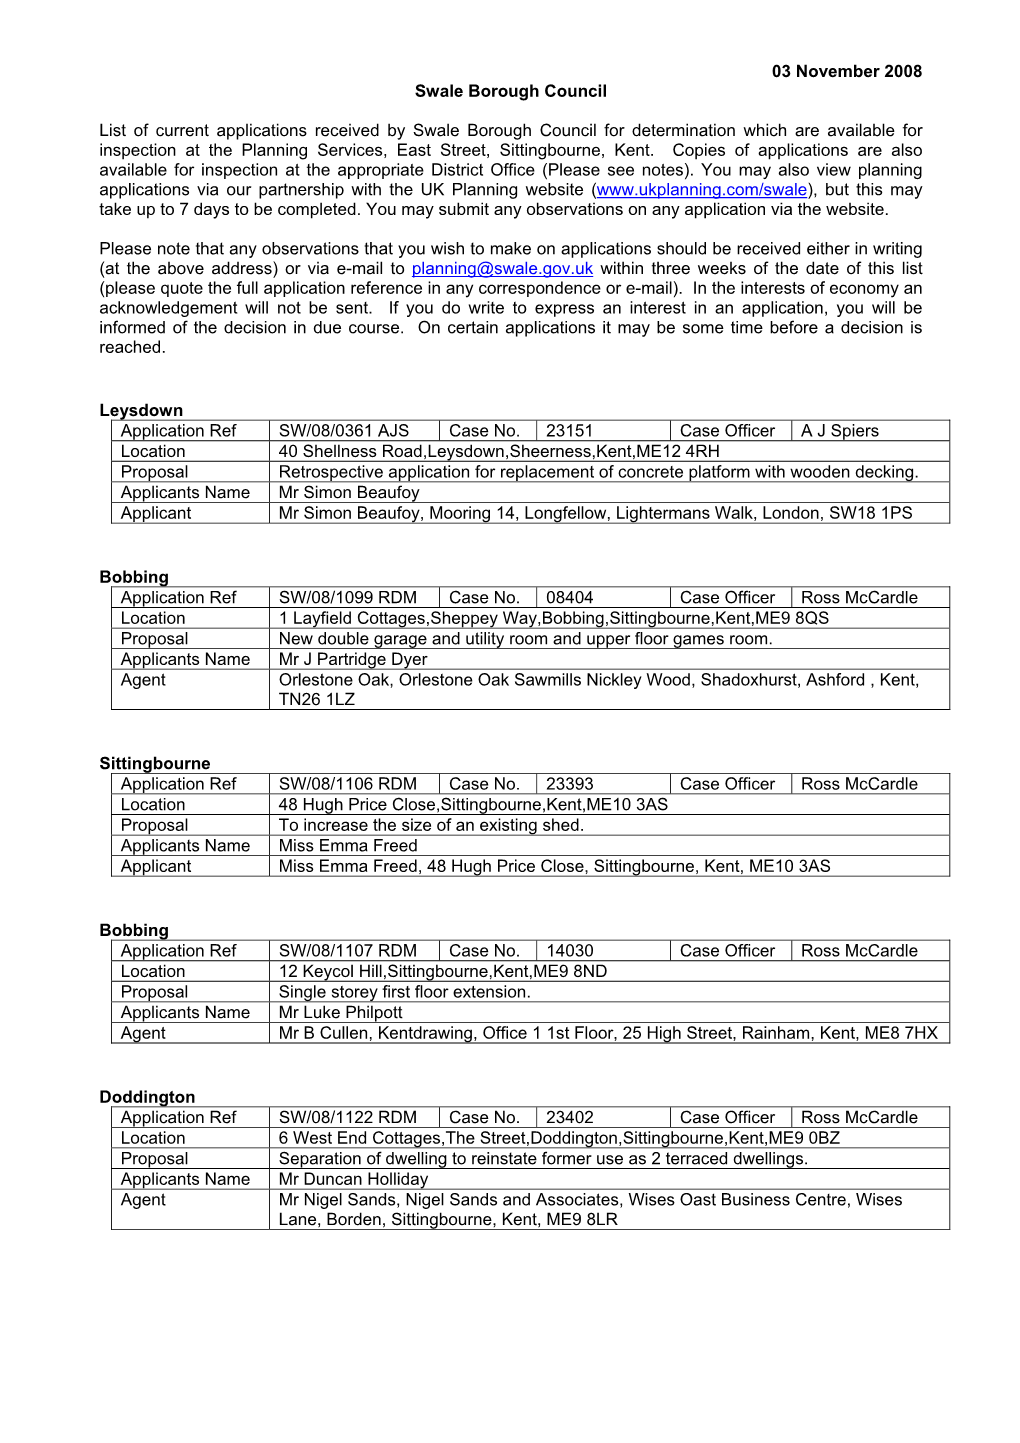 03 November 2008 Swale Borough Council List of Current Applications